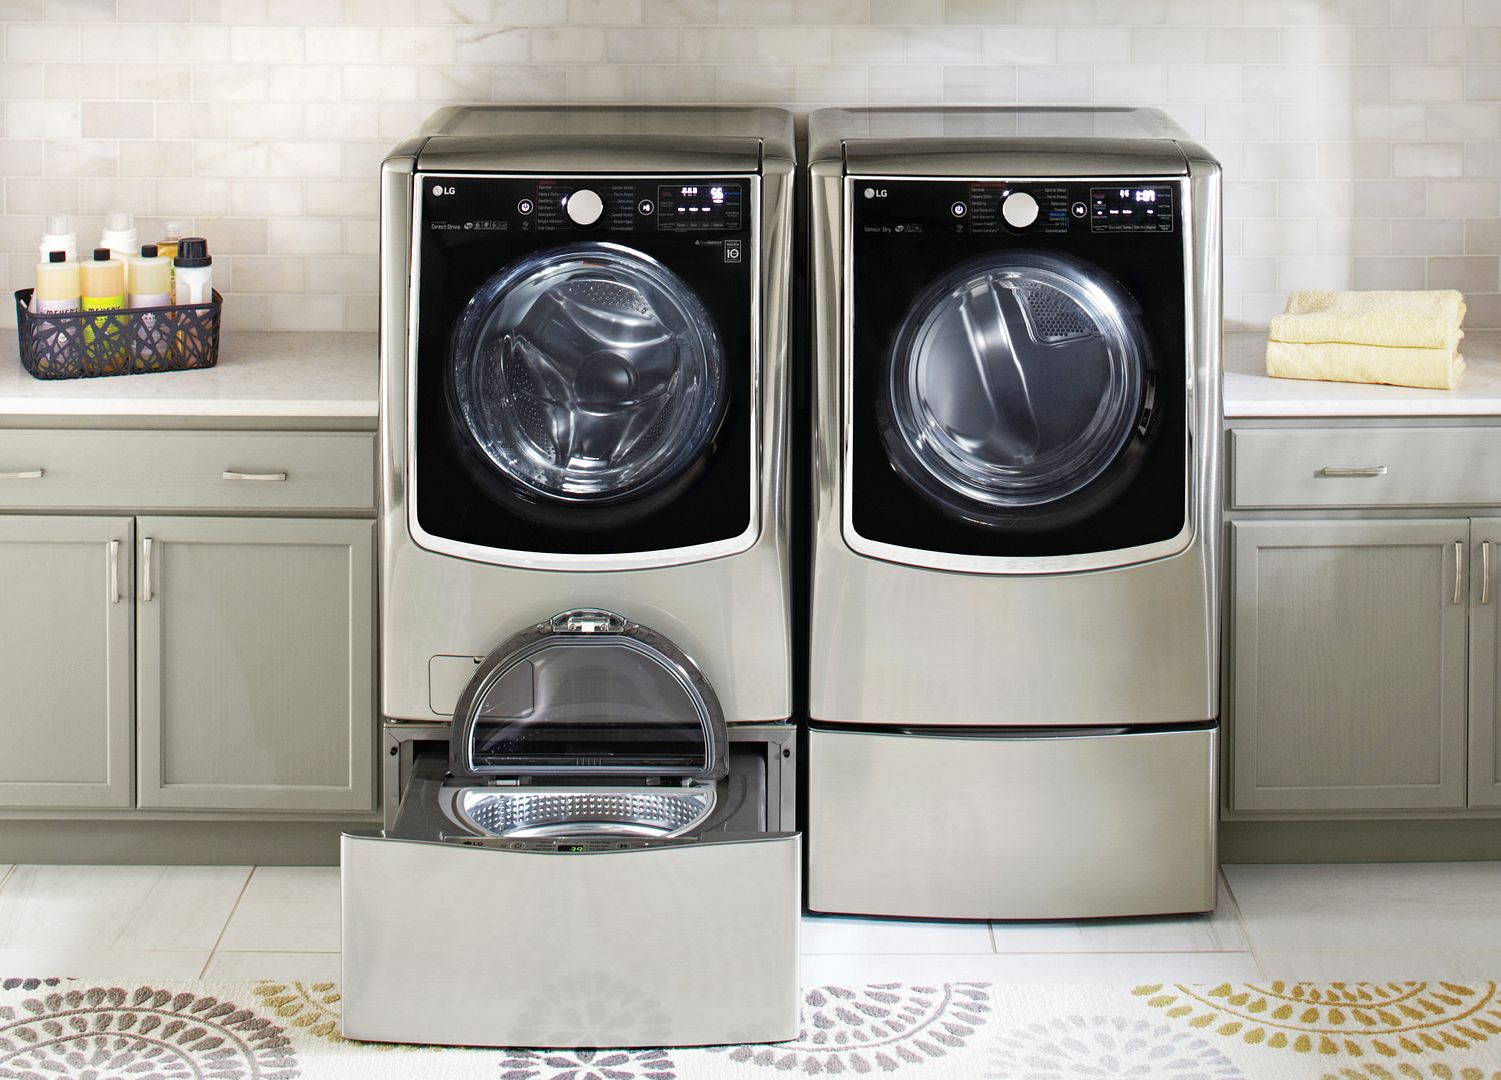 Cool new tech for parents: LG Twin wash lets you run two separate cycles at once in one machine!